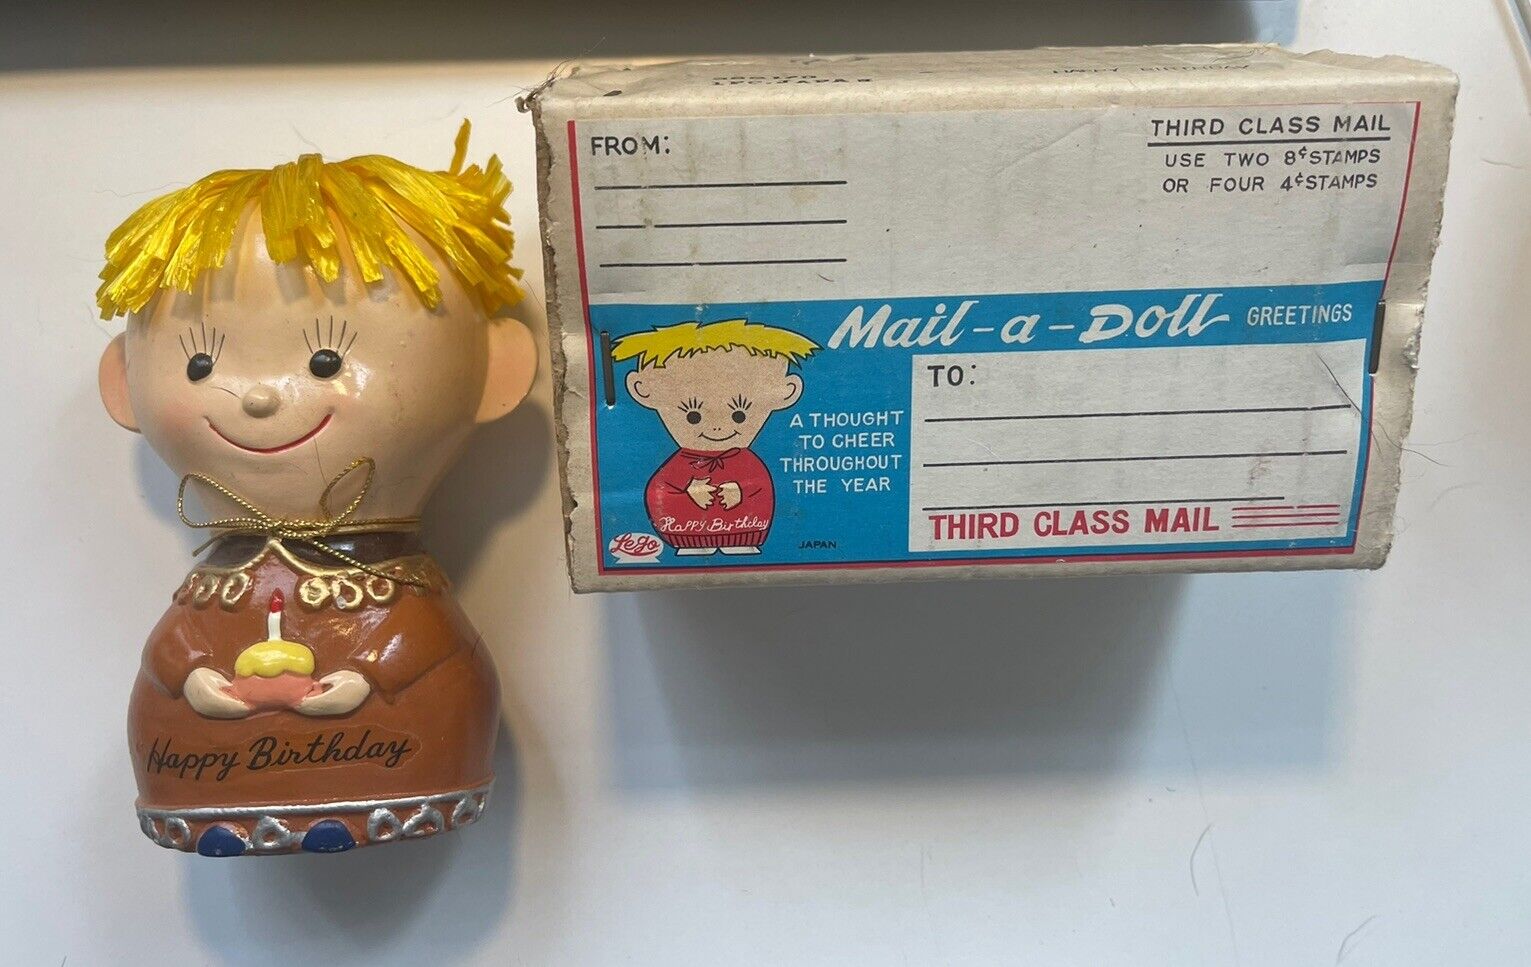 Japan Mail-a-Doll Greetings \